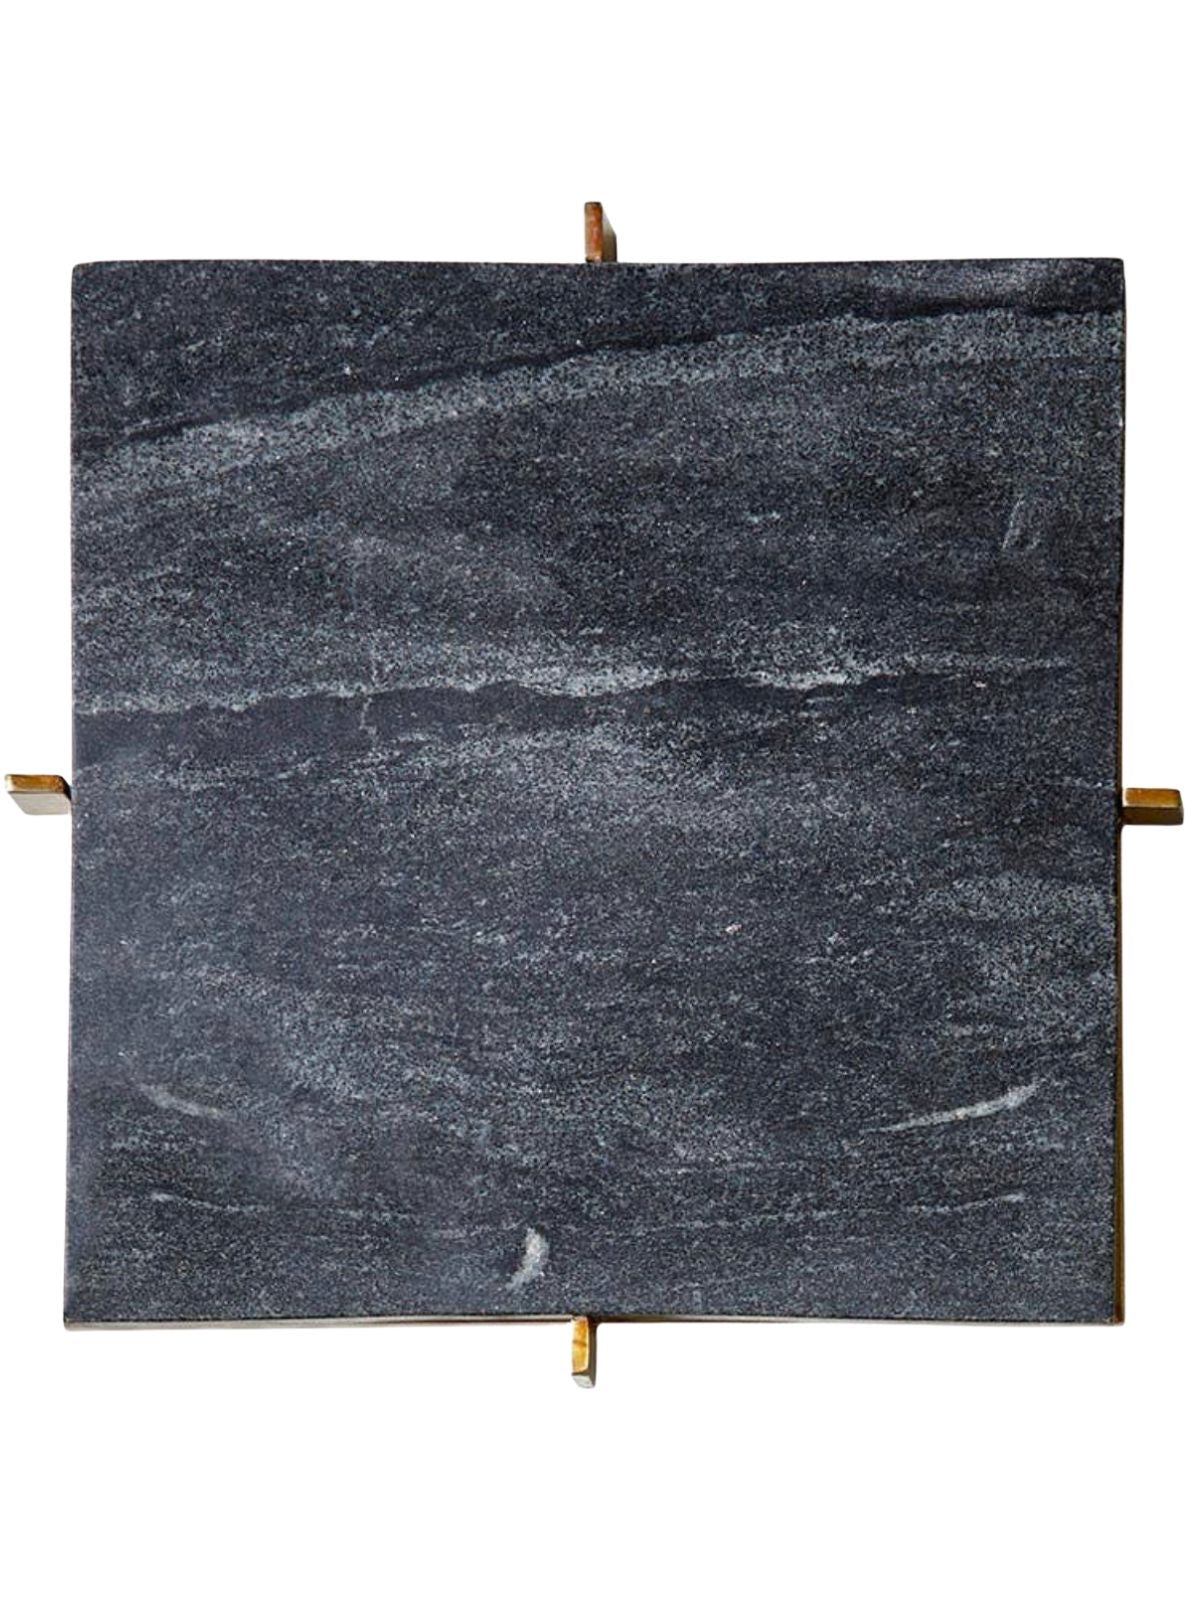 11 inch Squared Black Marble Serving Tray with Luxury Gold Metal Stand sold by KYA Home Decor.